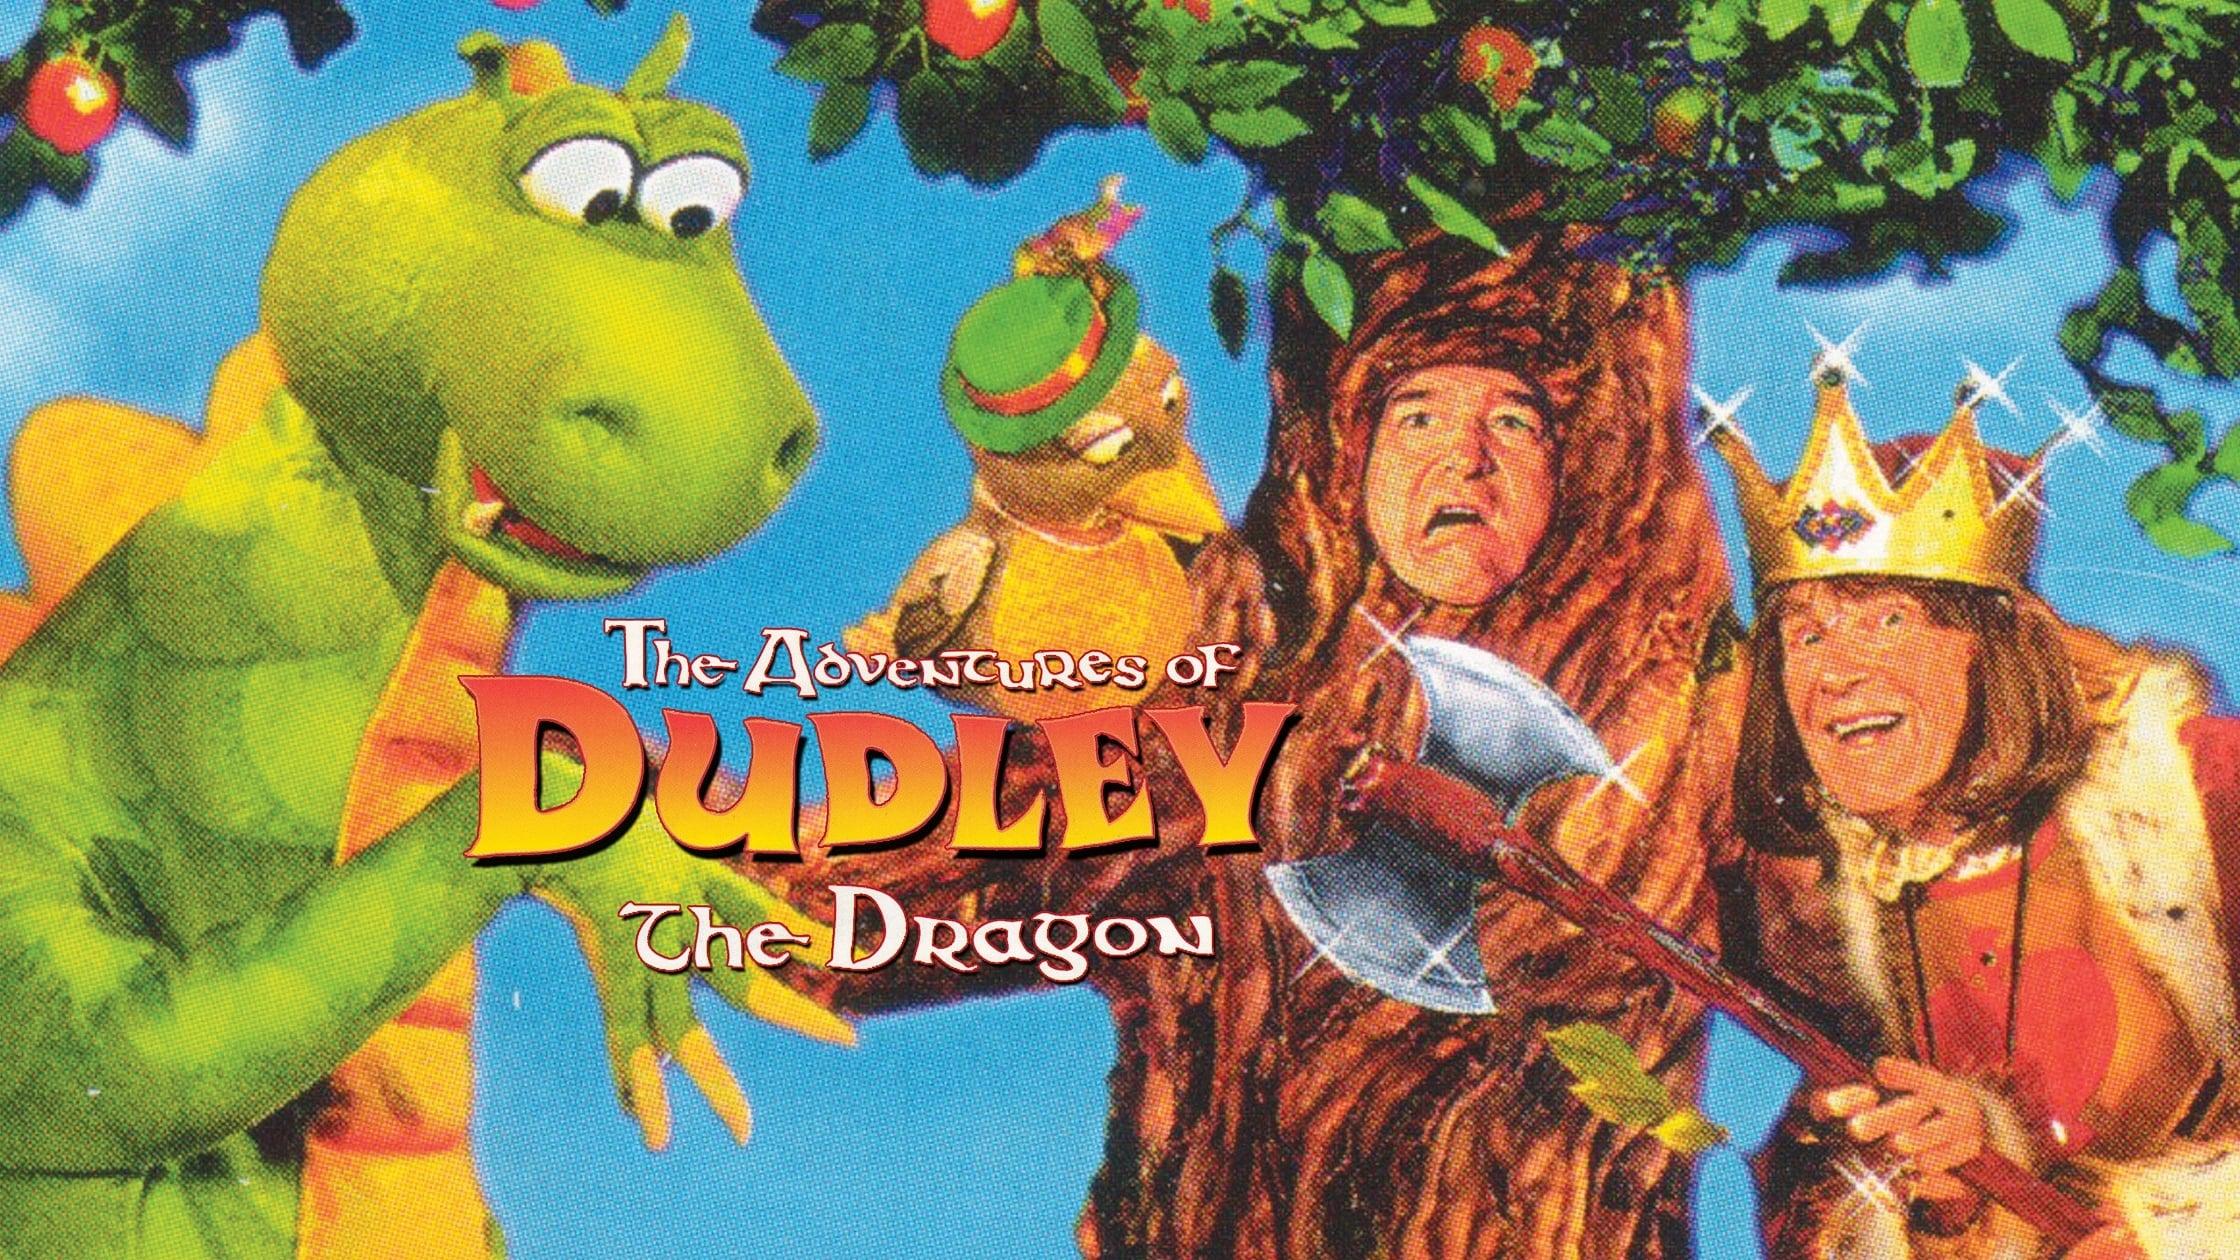 The Adventures of Dudley the Dragon backdrop